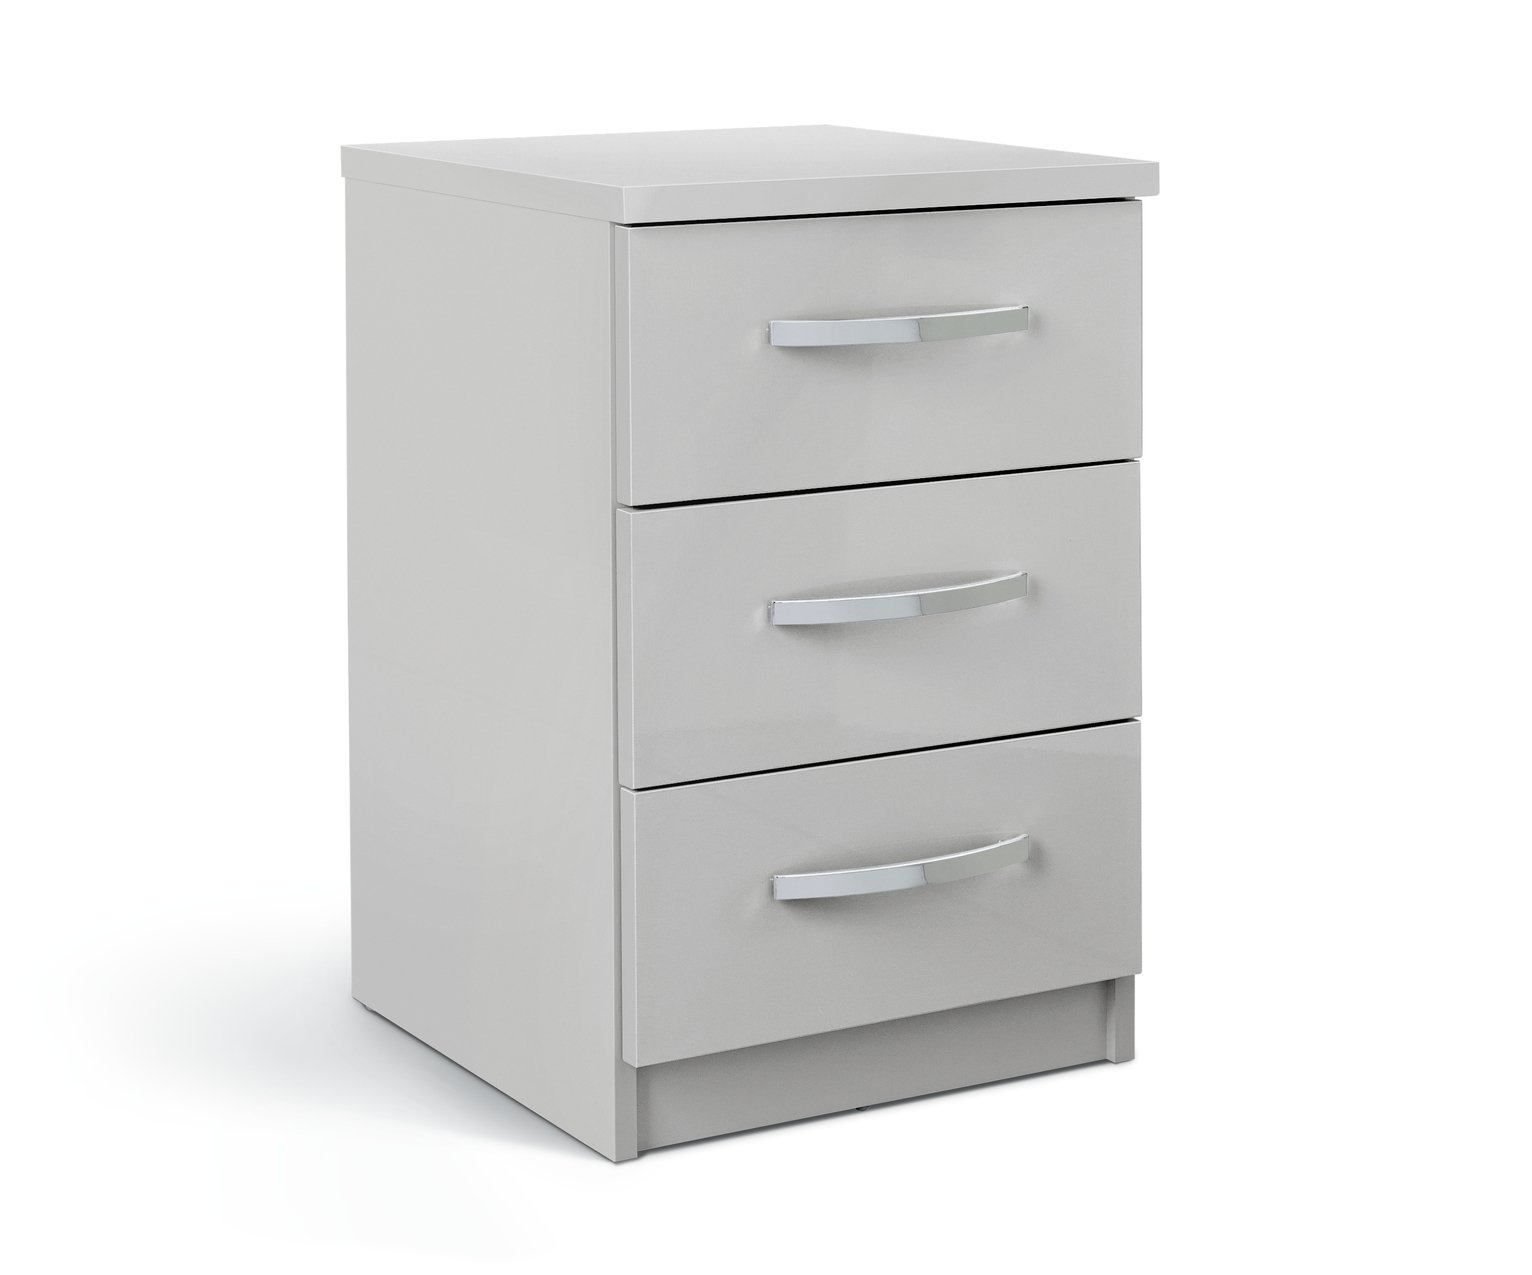 Argos Home Hallingford 3 Drawer Bedside Table - Grey Gloss